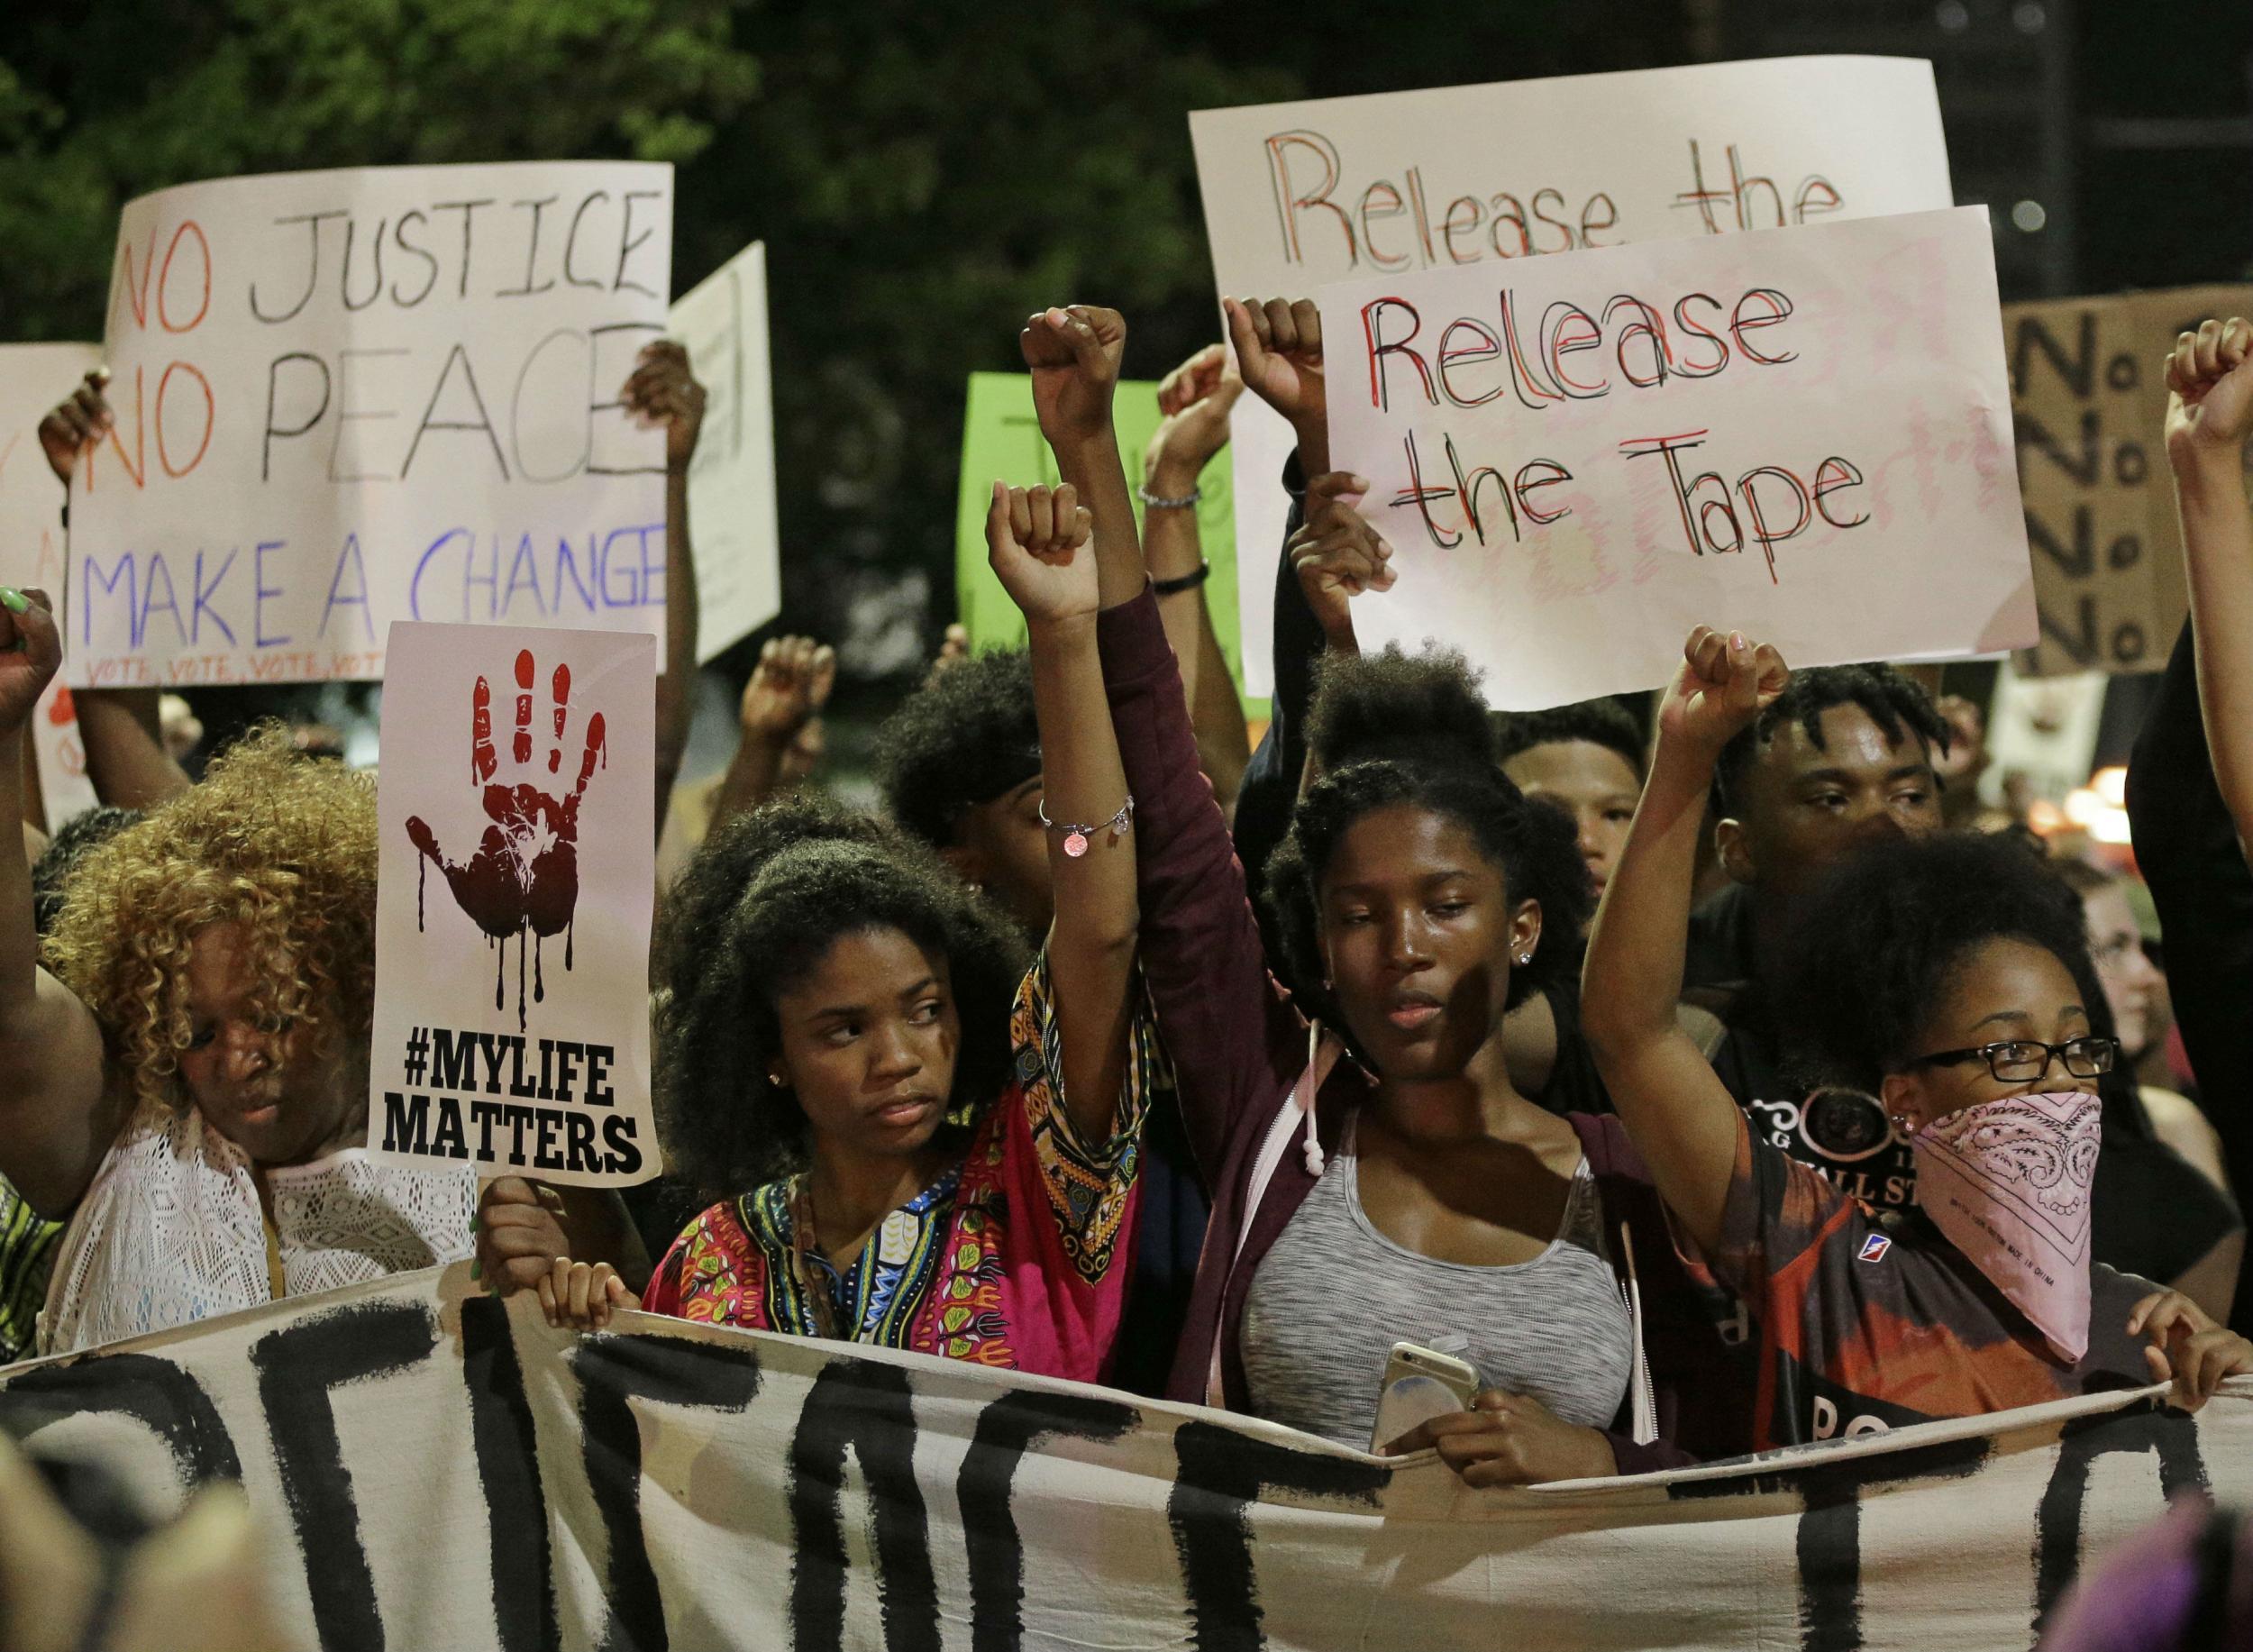 The demonstrations were sparked by the shooting of a black man by police